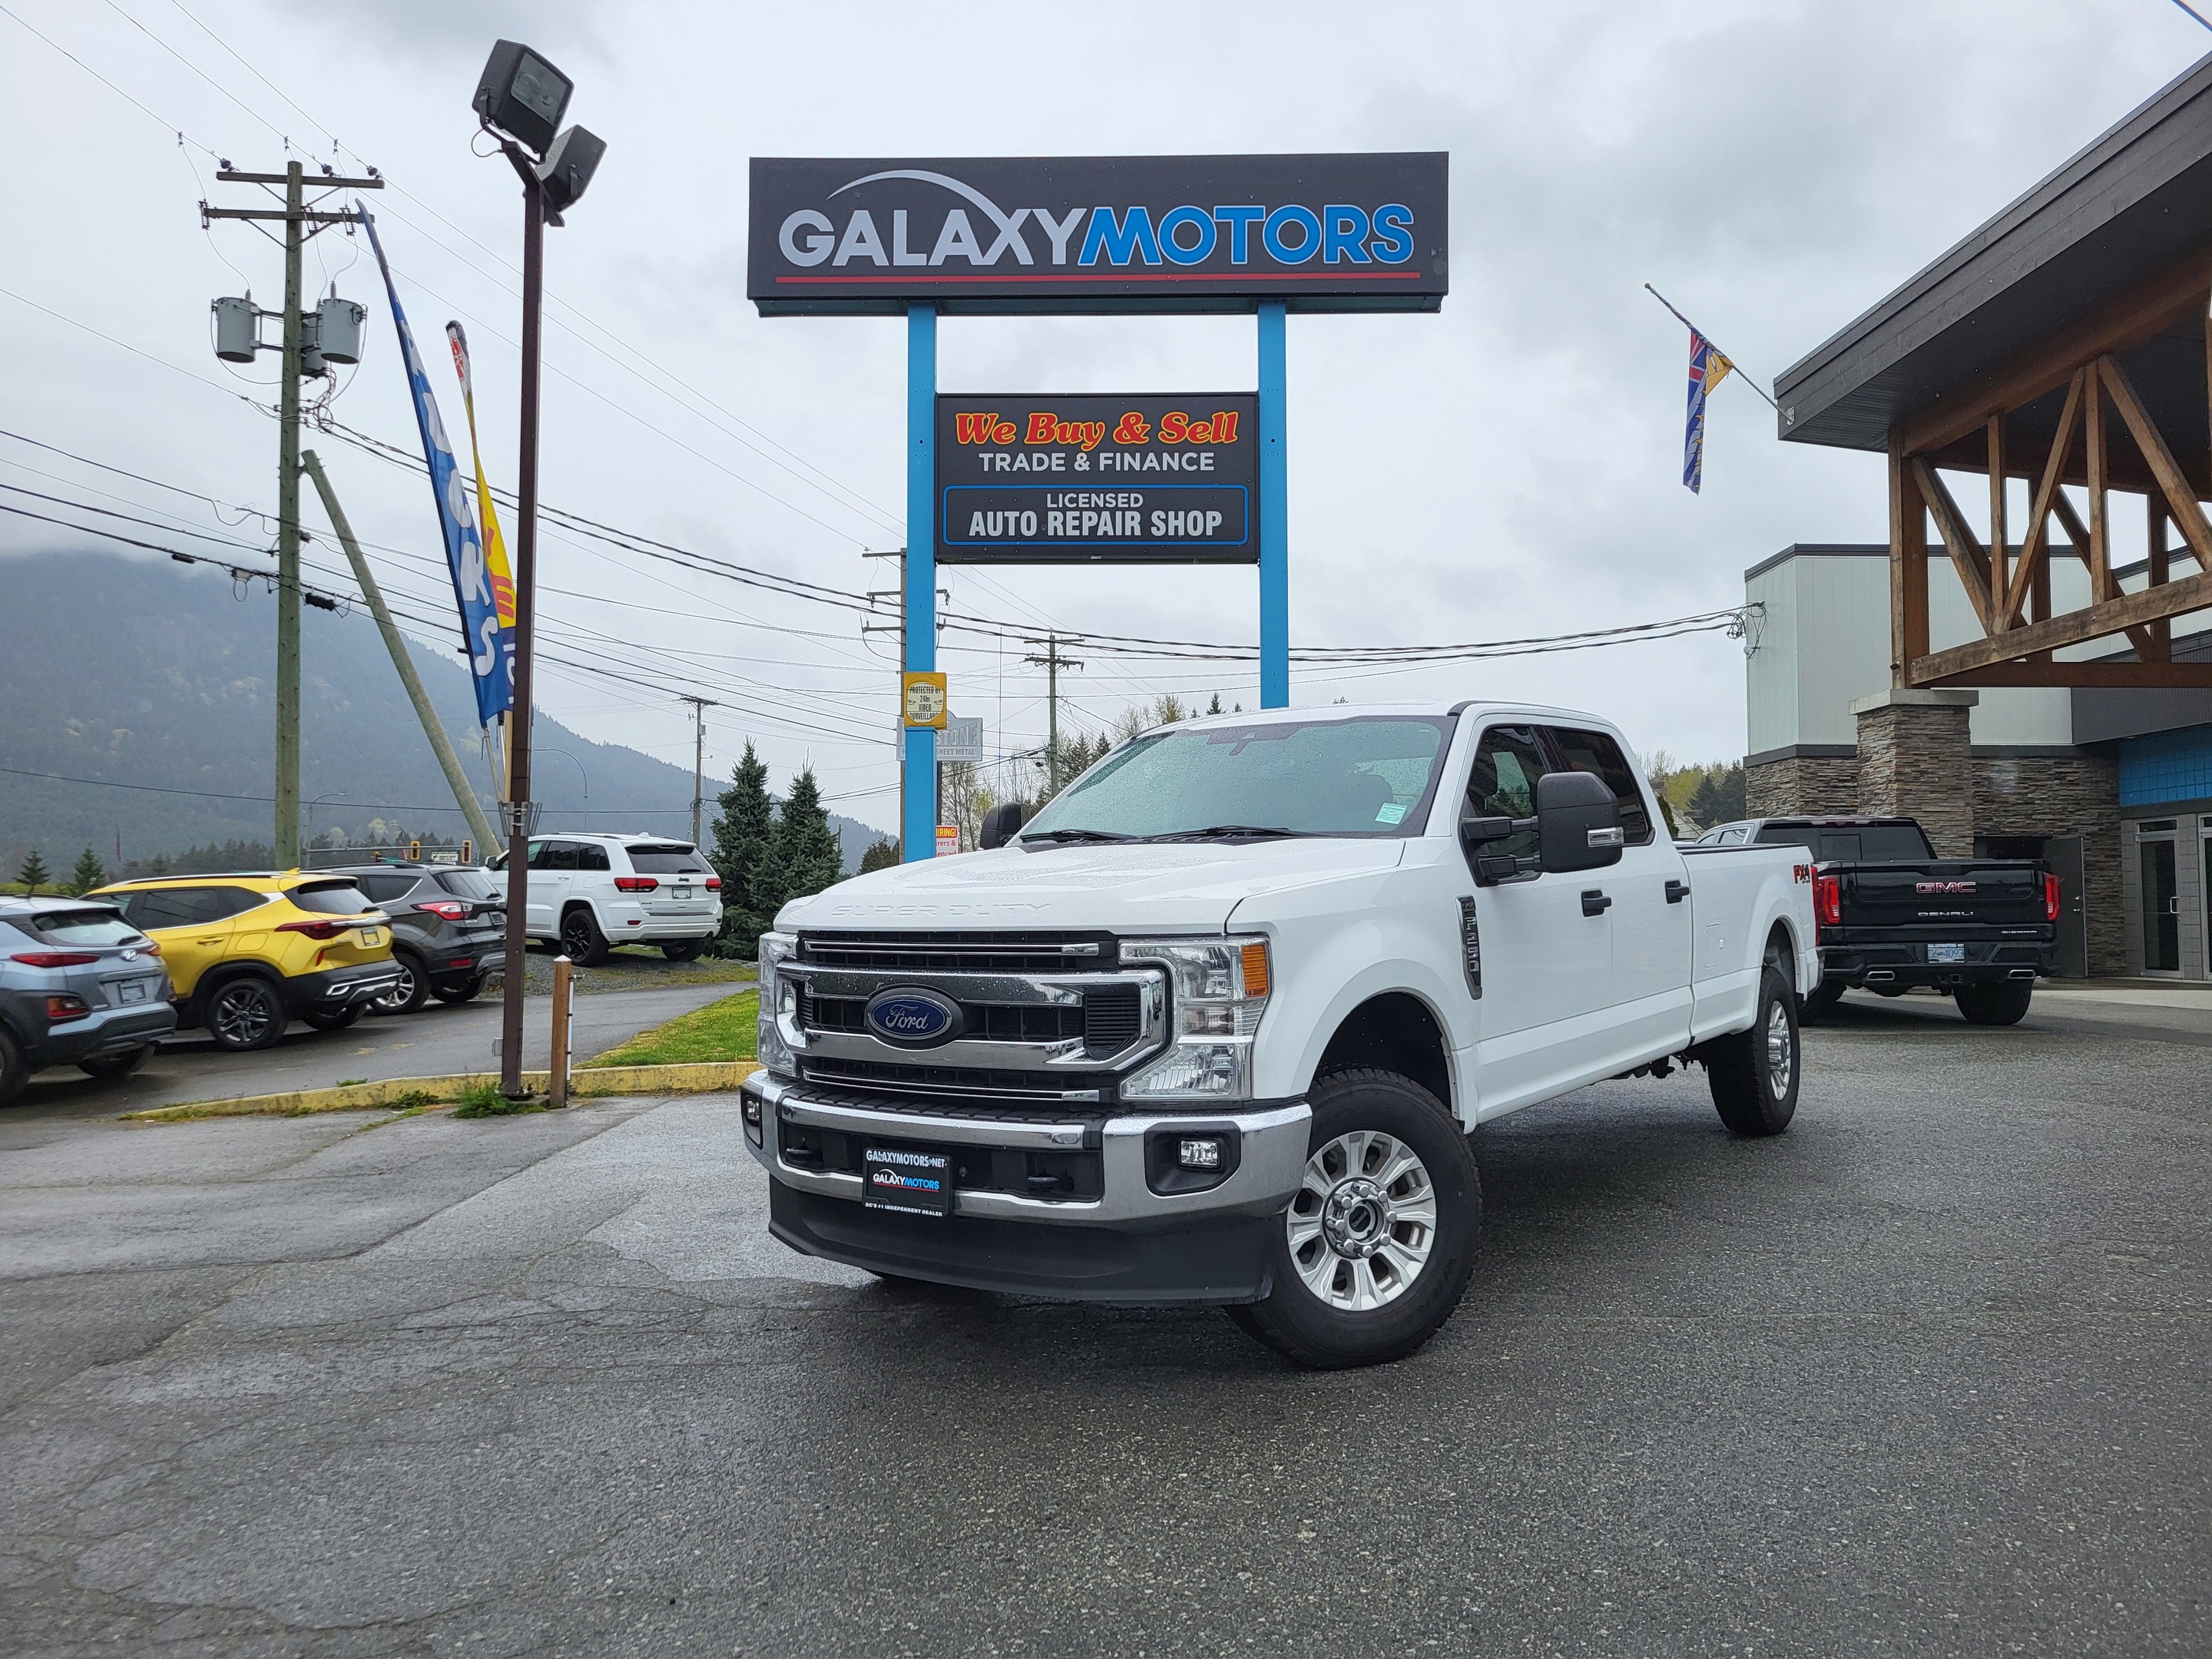 2020 Ford F-250 SUPER DUTY XLT Super Duty w/Overdrive 4WD,Apple Car Play